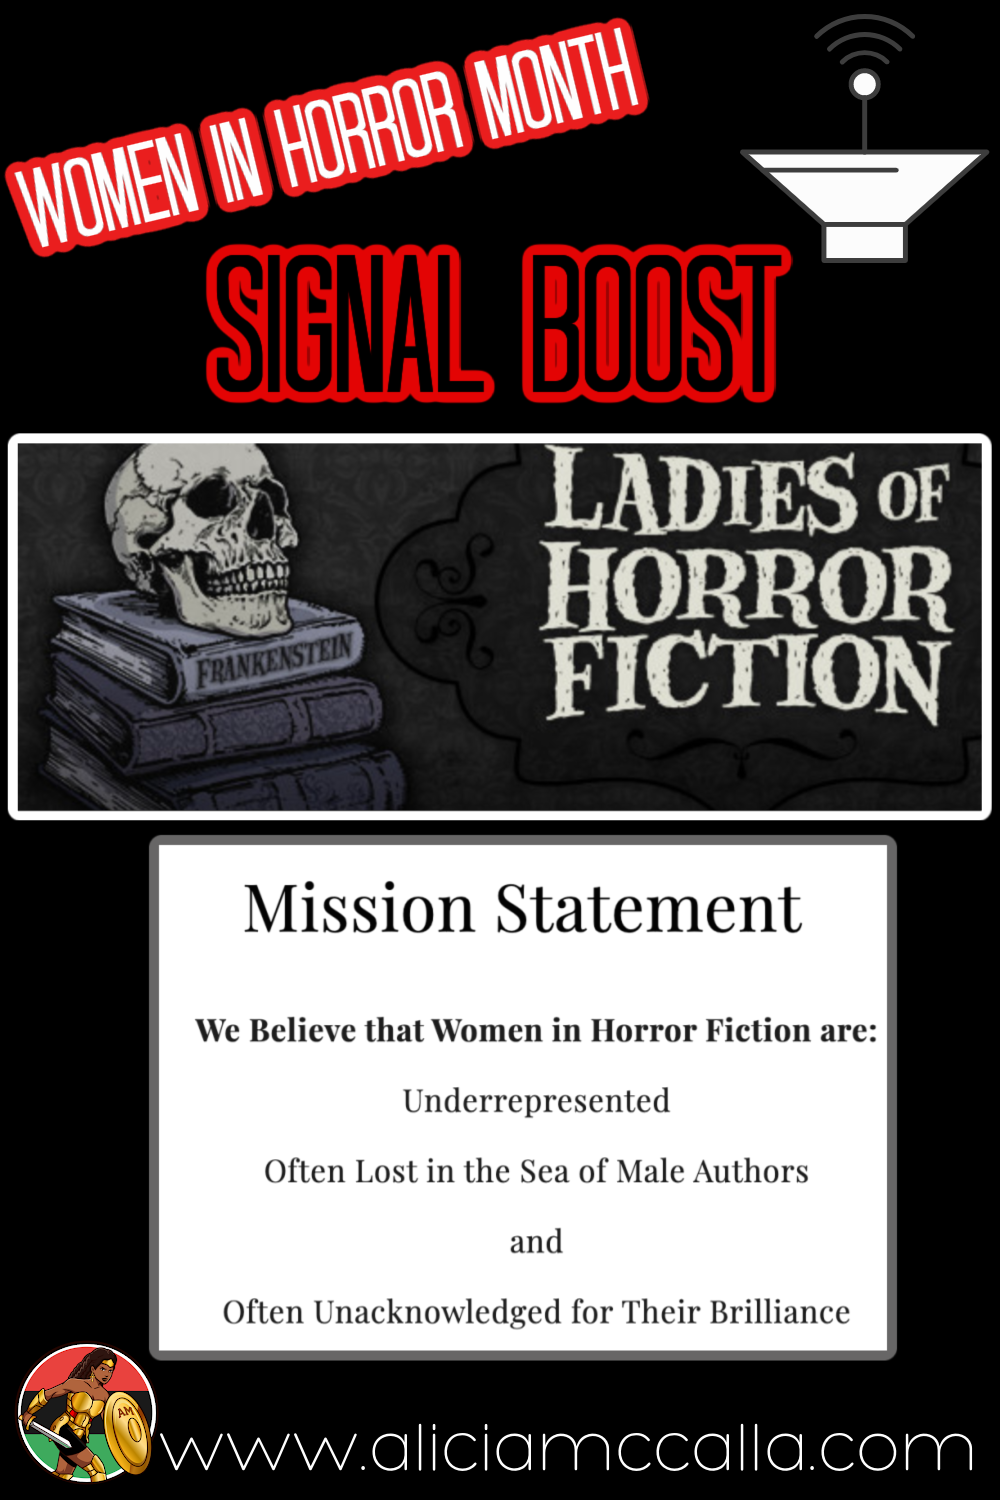 Women in Horror Month: Signal Boost Ladies of Horror Fiction